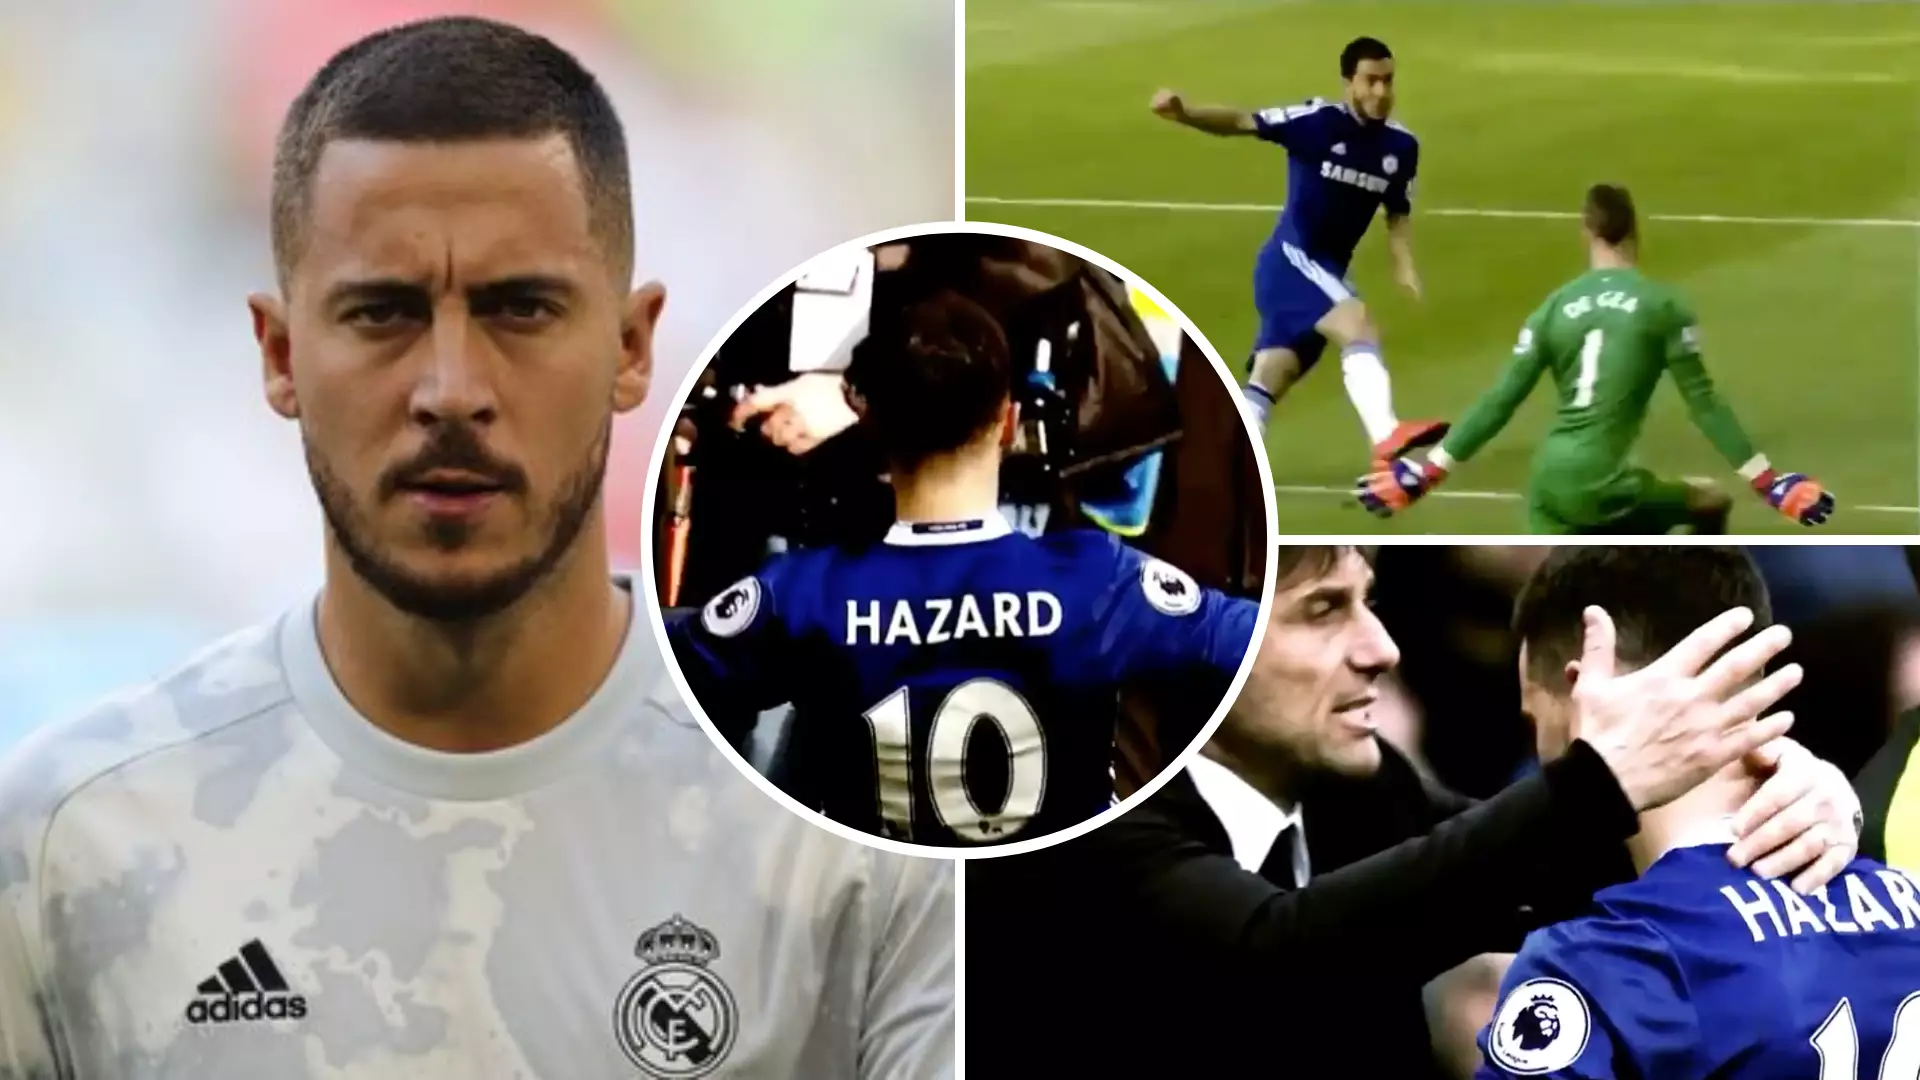 Chelsea Fan Shares Incredible Eden Hazard Video After Real Madrid Star's Latest Injury